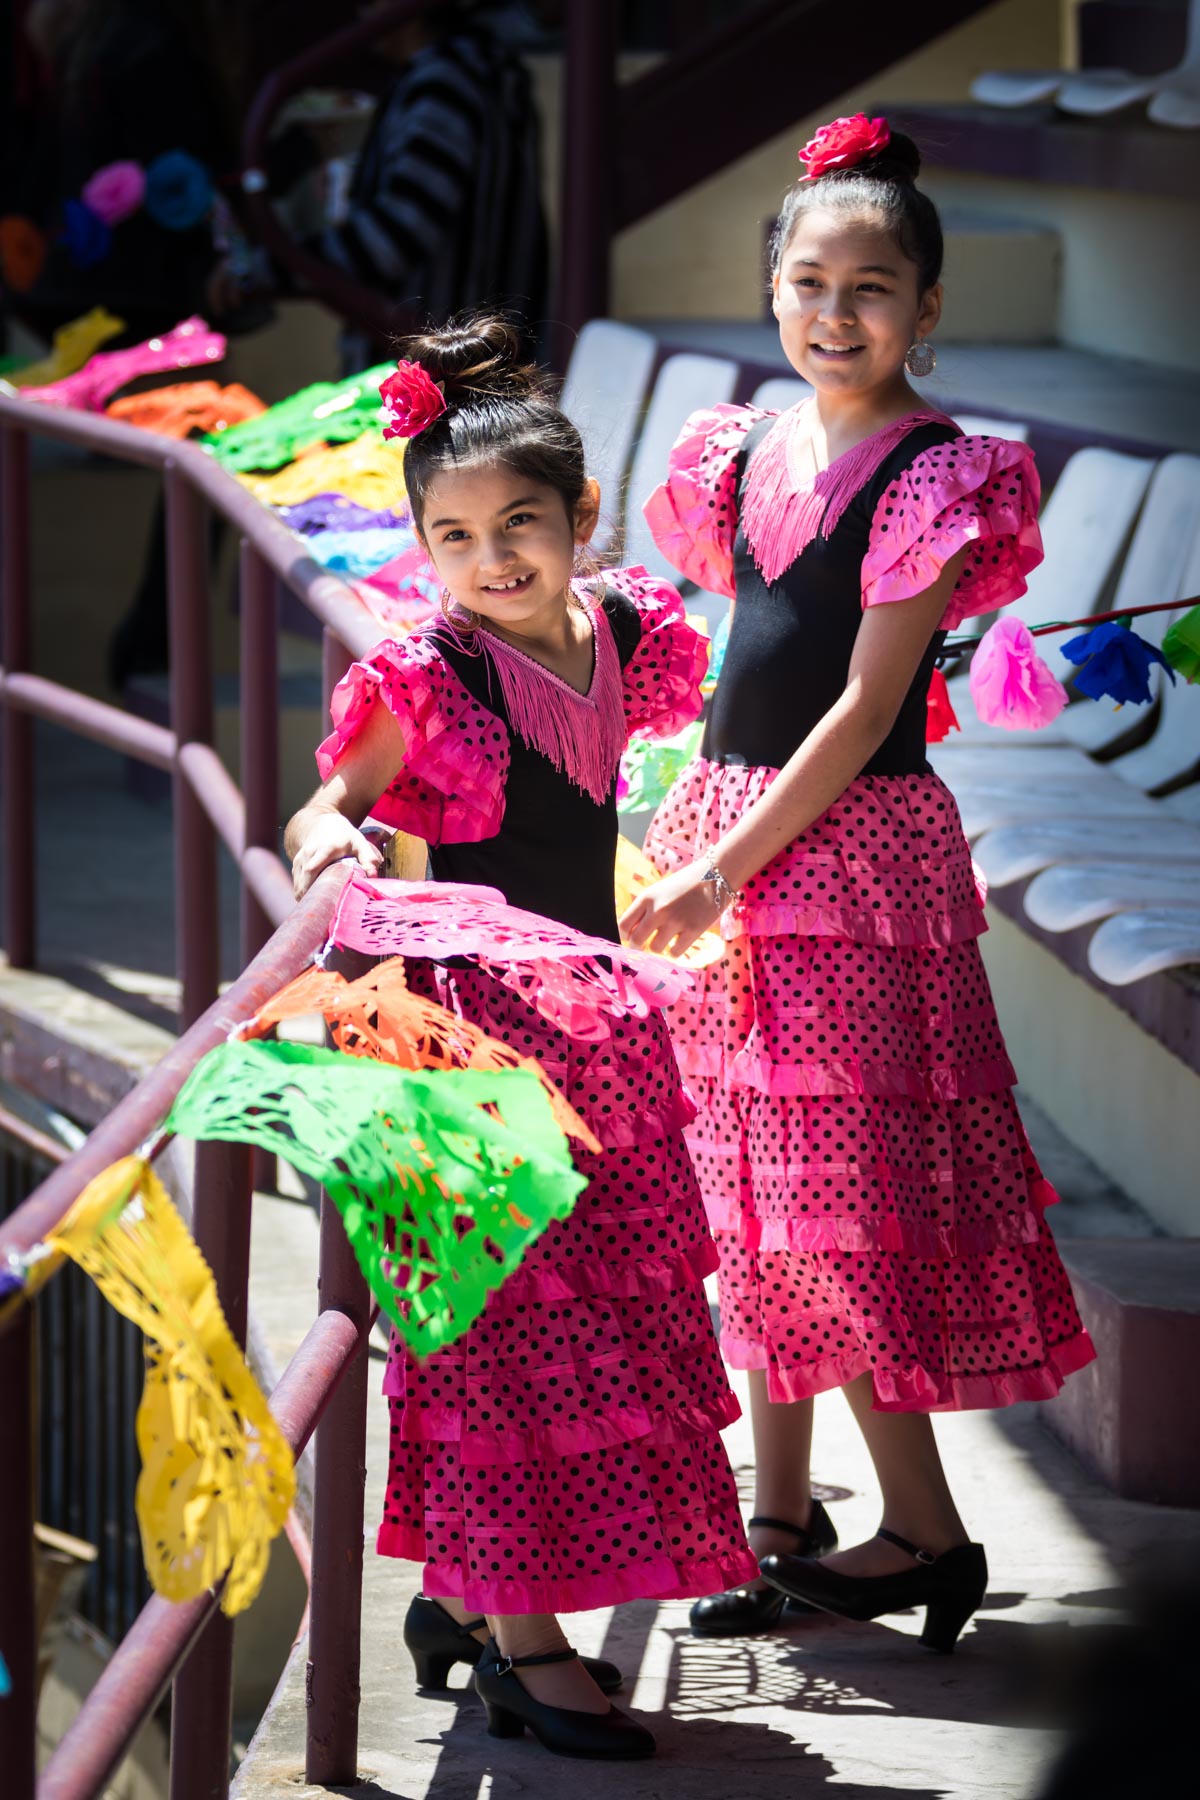 Little dancers wearing pink and black dresses during Day at Old Mexico for an article on the best Fiesta photos